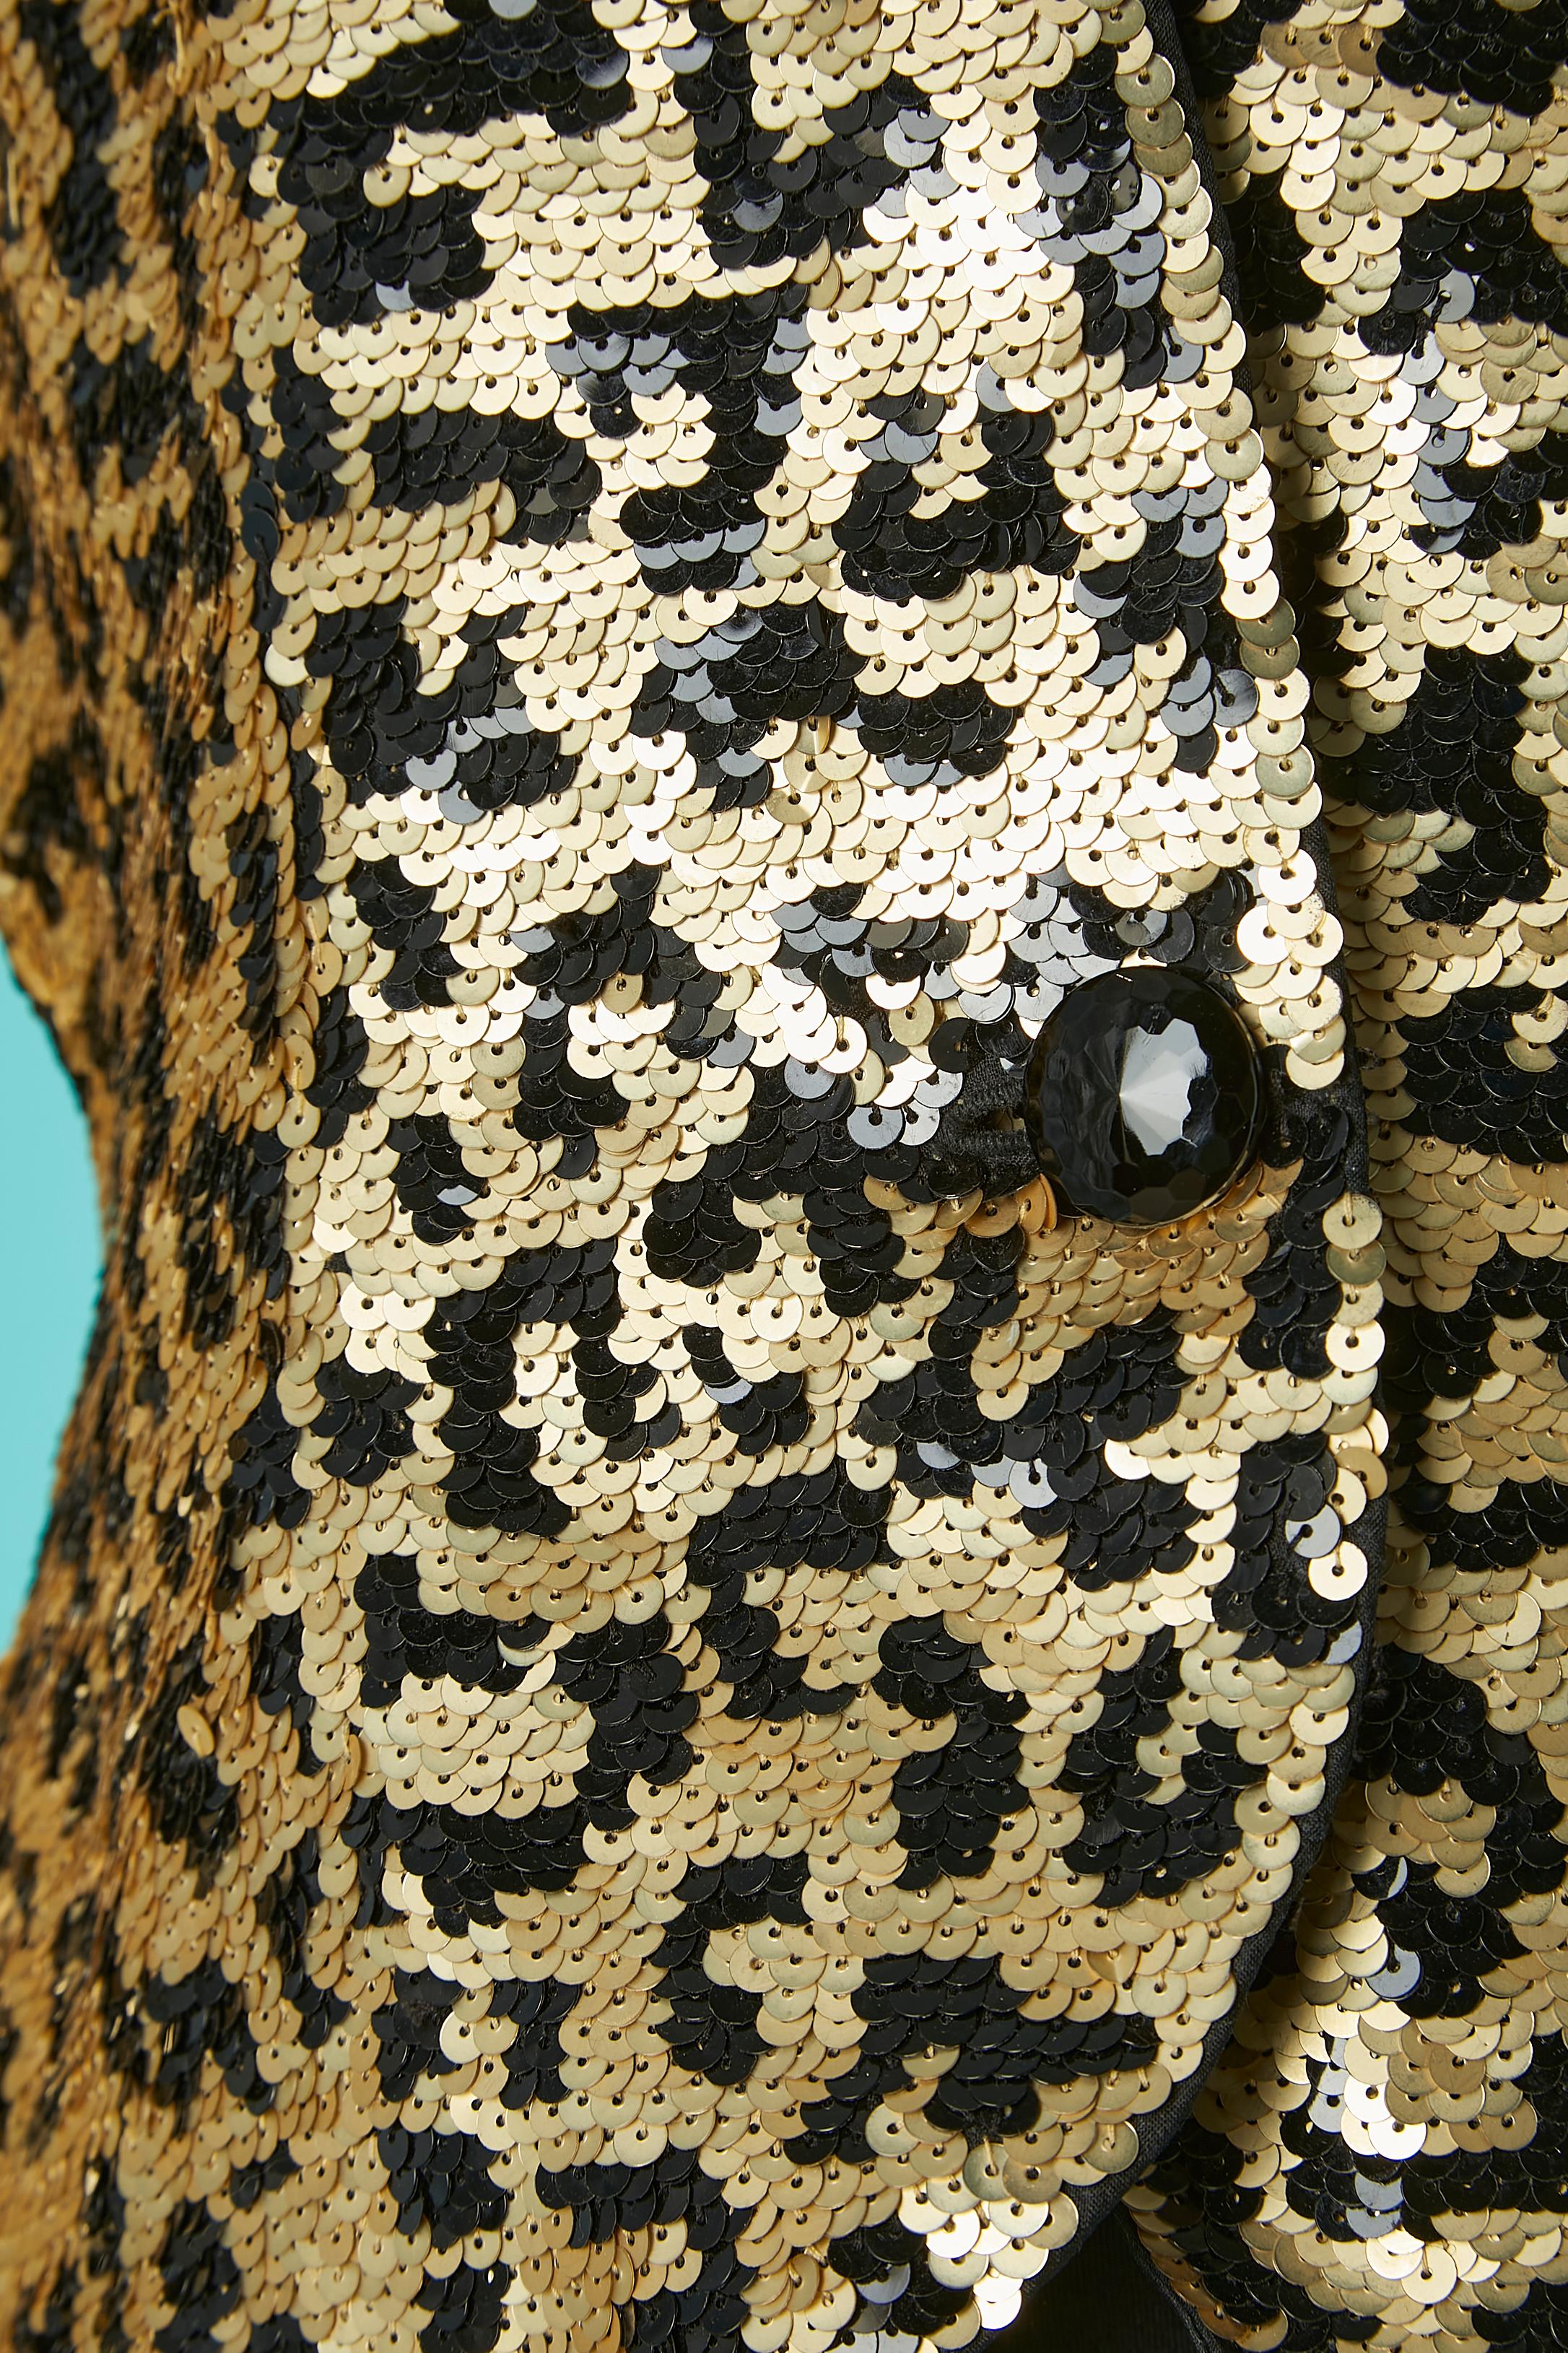 Black and gold sequin evening jacket with animal pattern. Main fabric: silk. Lining: rayon
Shoulder-pads. One black button in the middle front.
SIZE S